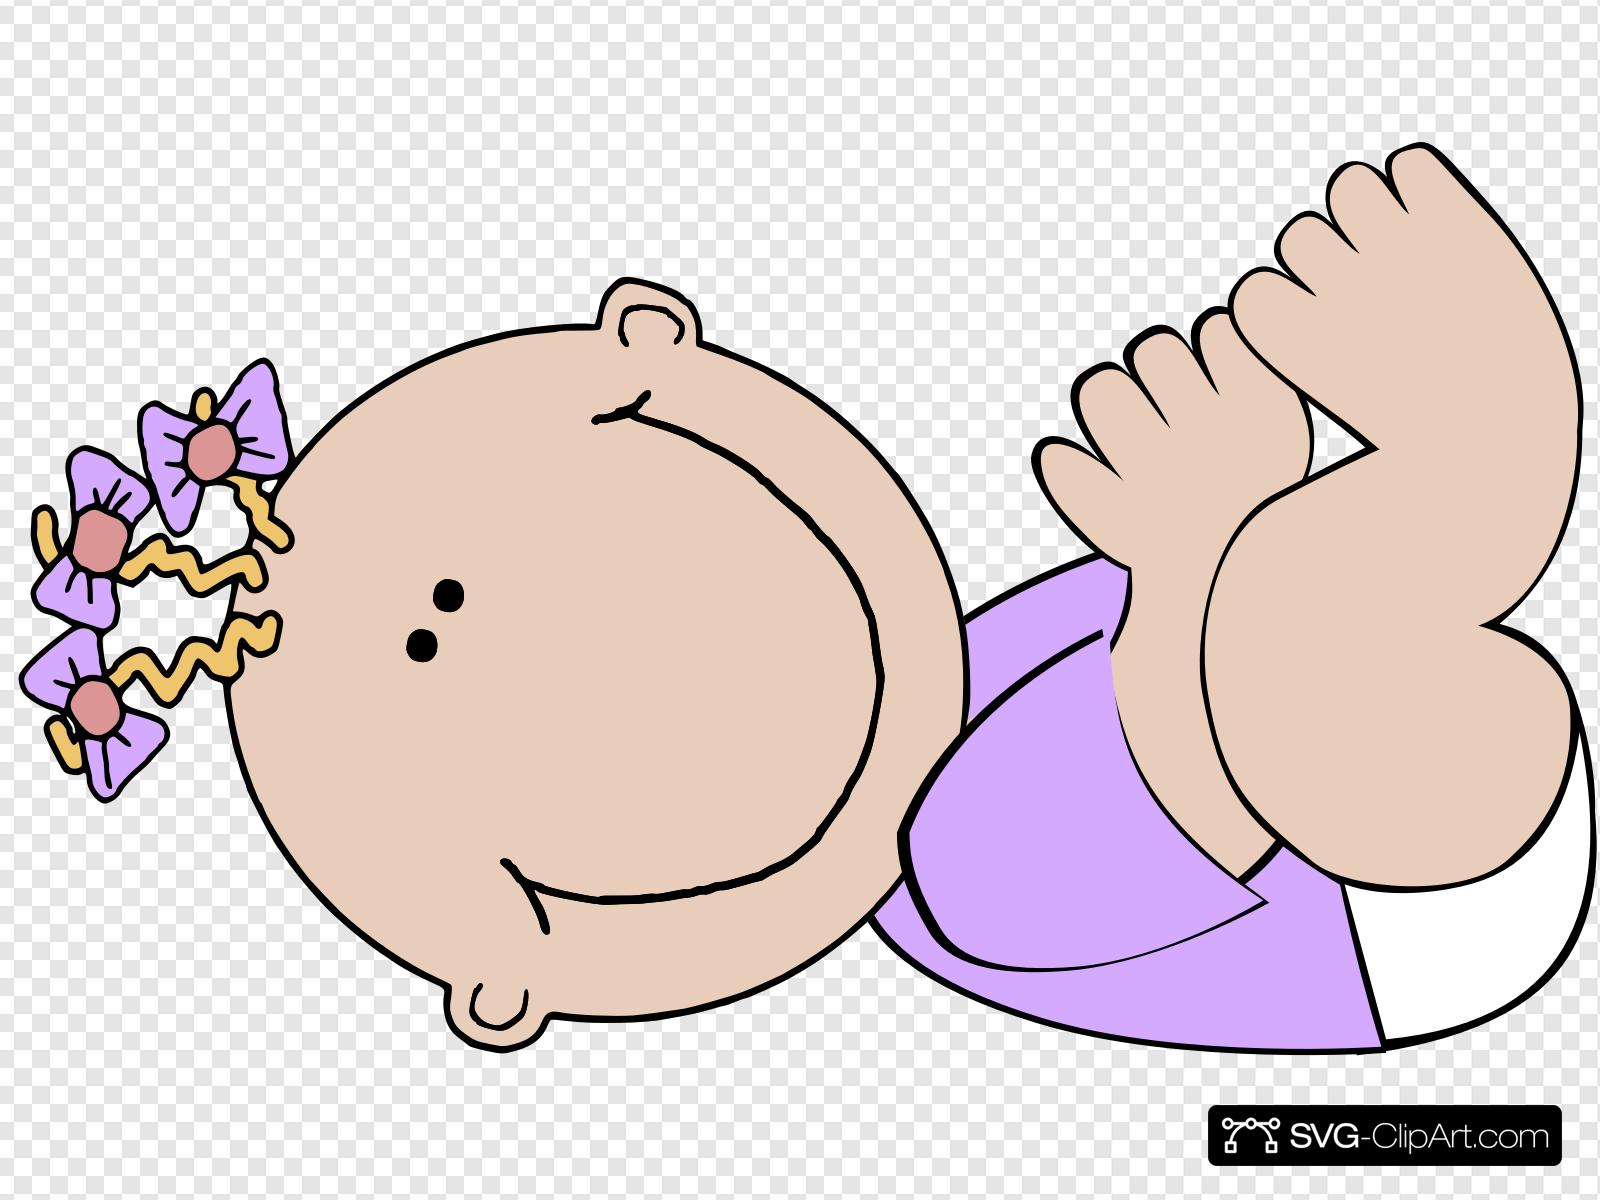 Purple Baby Clip art, Icon and SVG